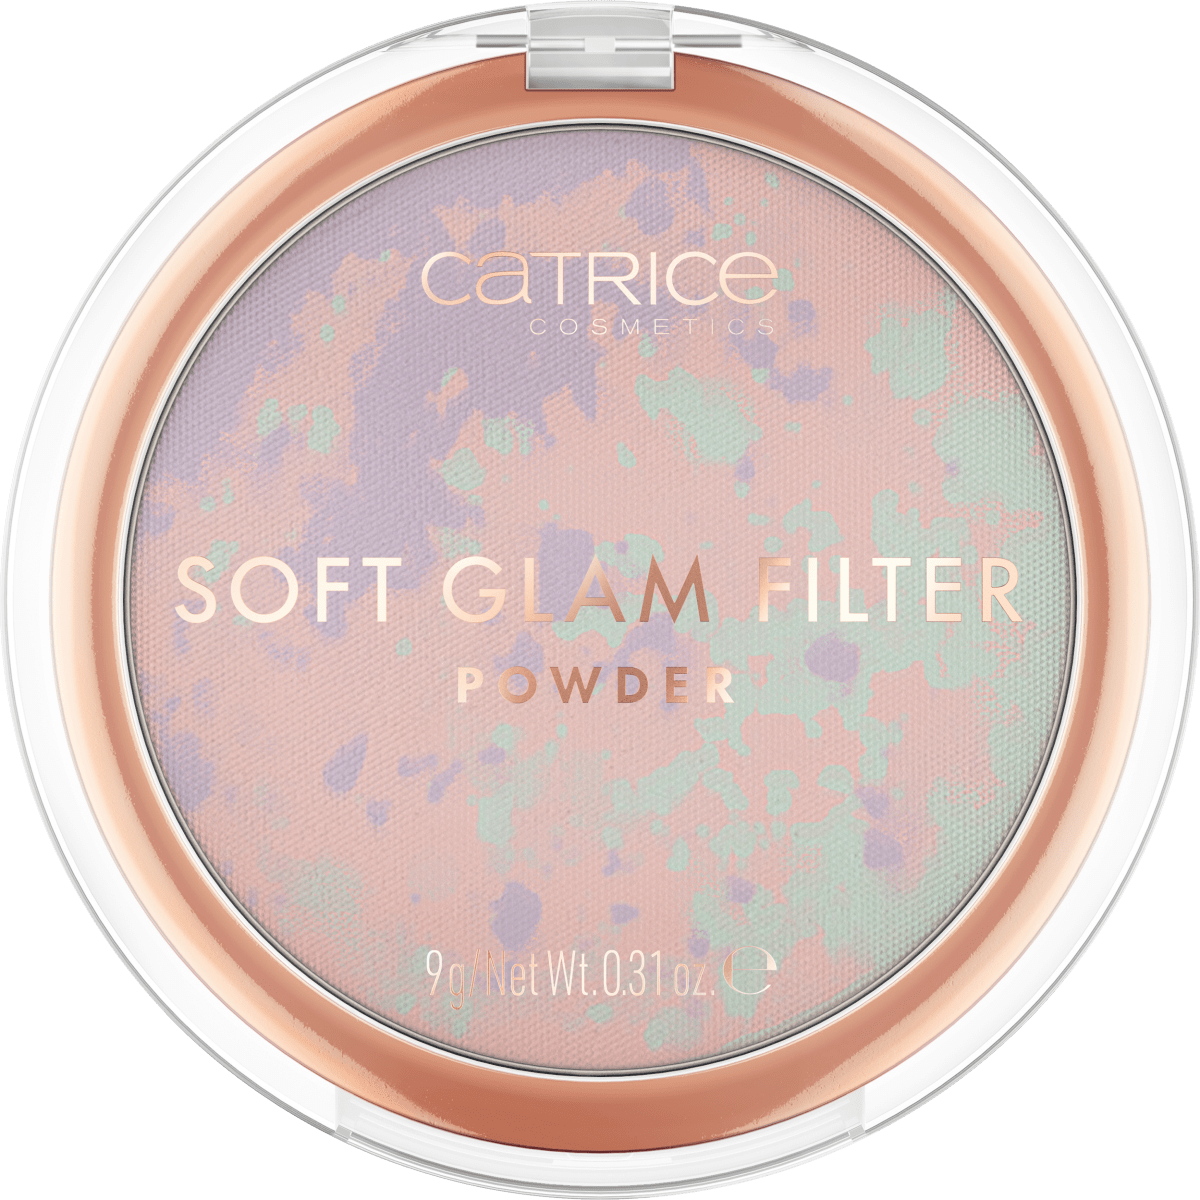 Puder Soft Glam Filter 010 Beautiful You 9 г. Catrice